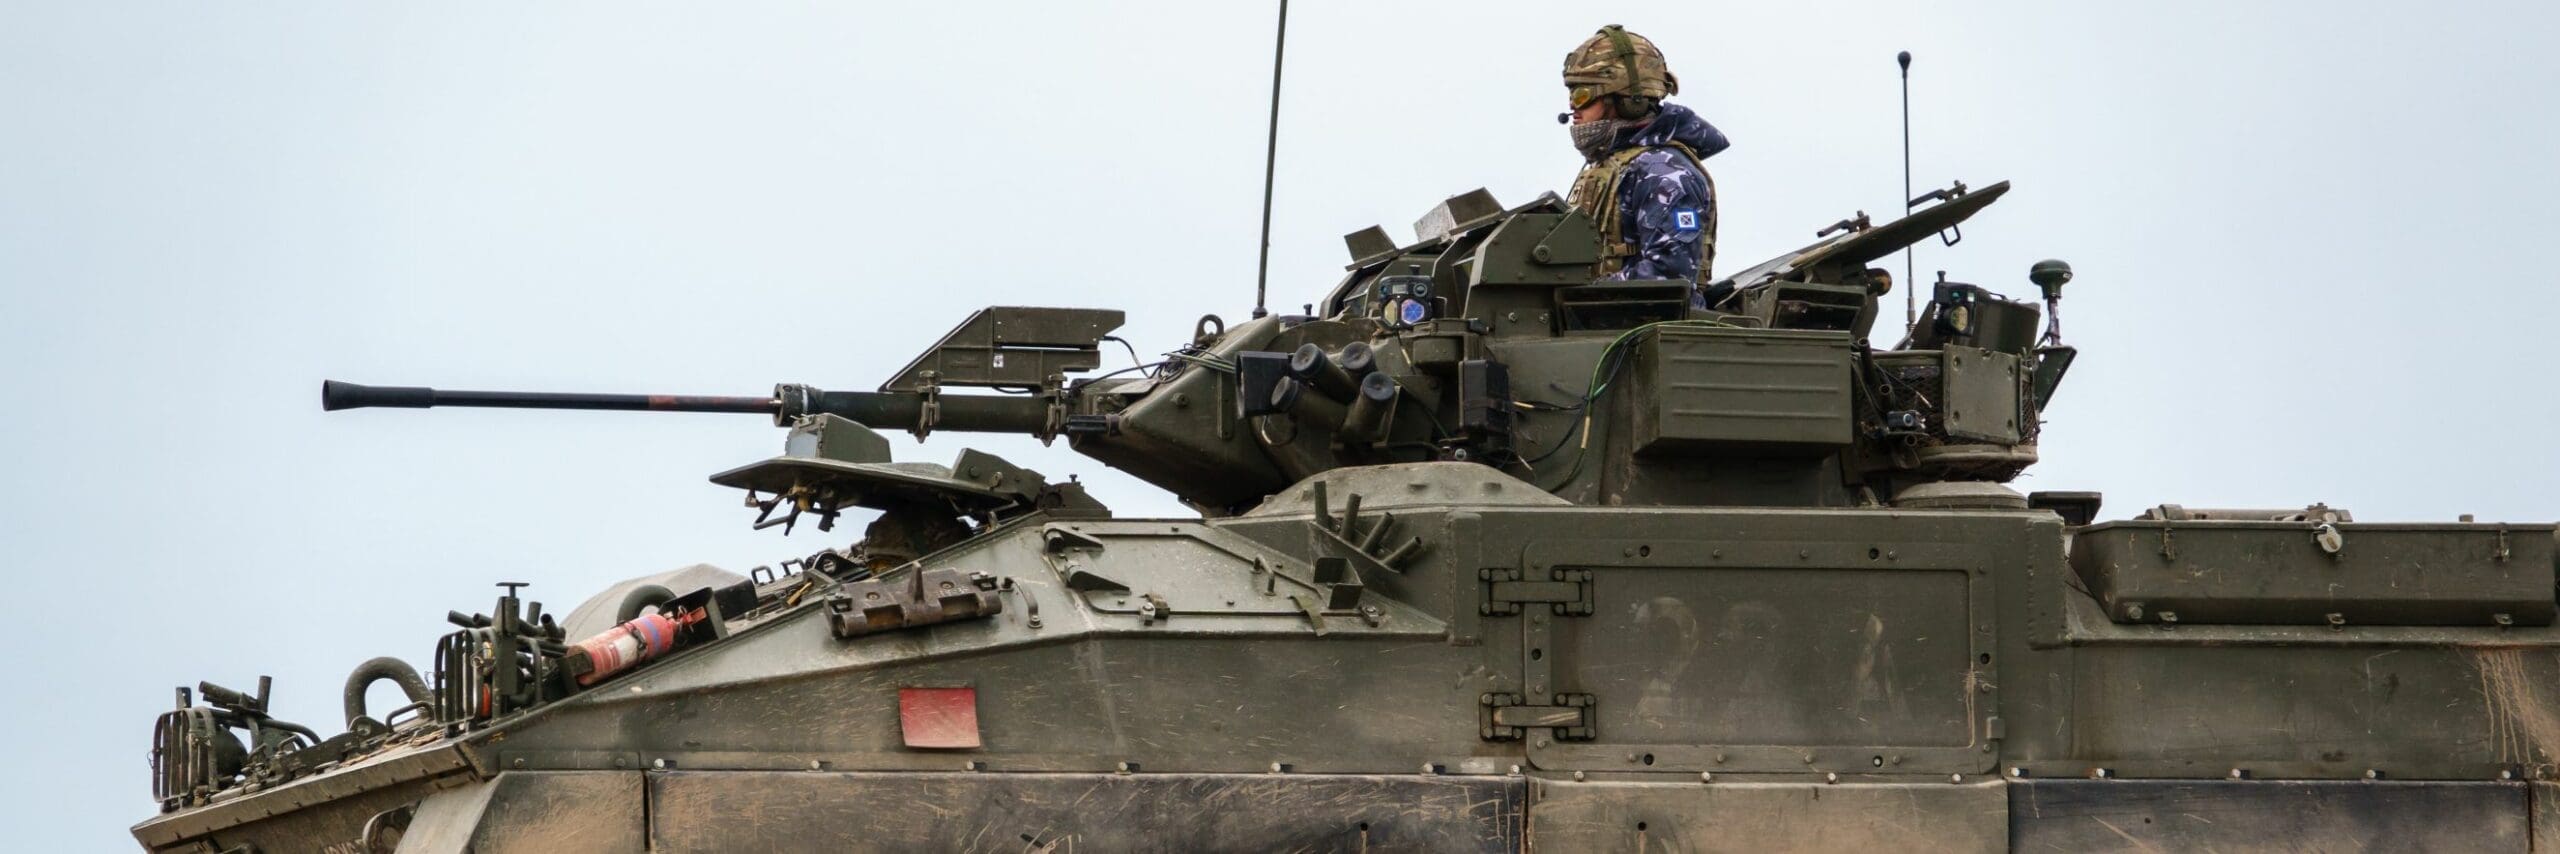 Soldier in camouflaged uniform standing atop an armored military vehicle with mounted weaponry, ready to face the latest trends in warfare.